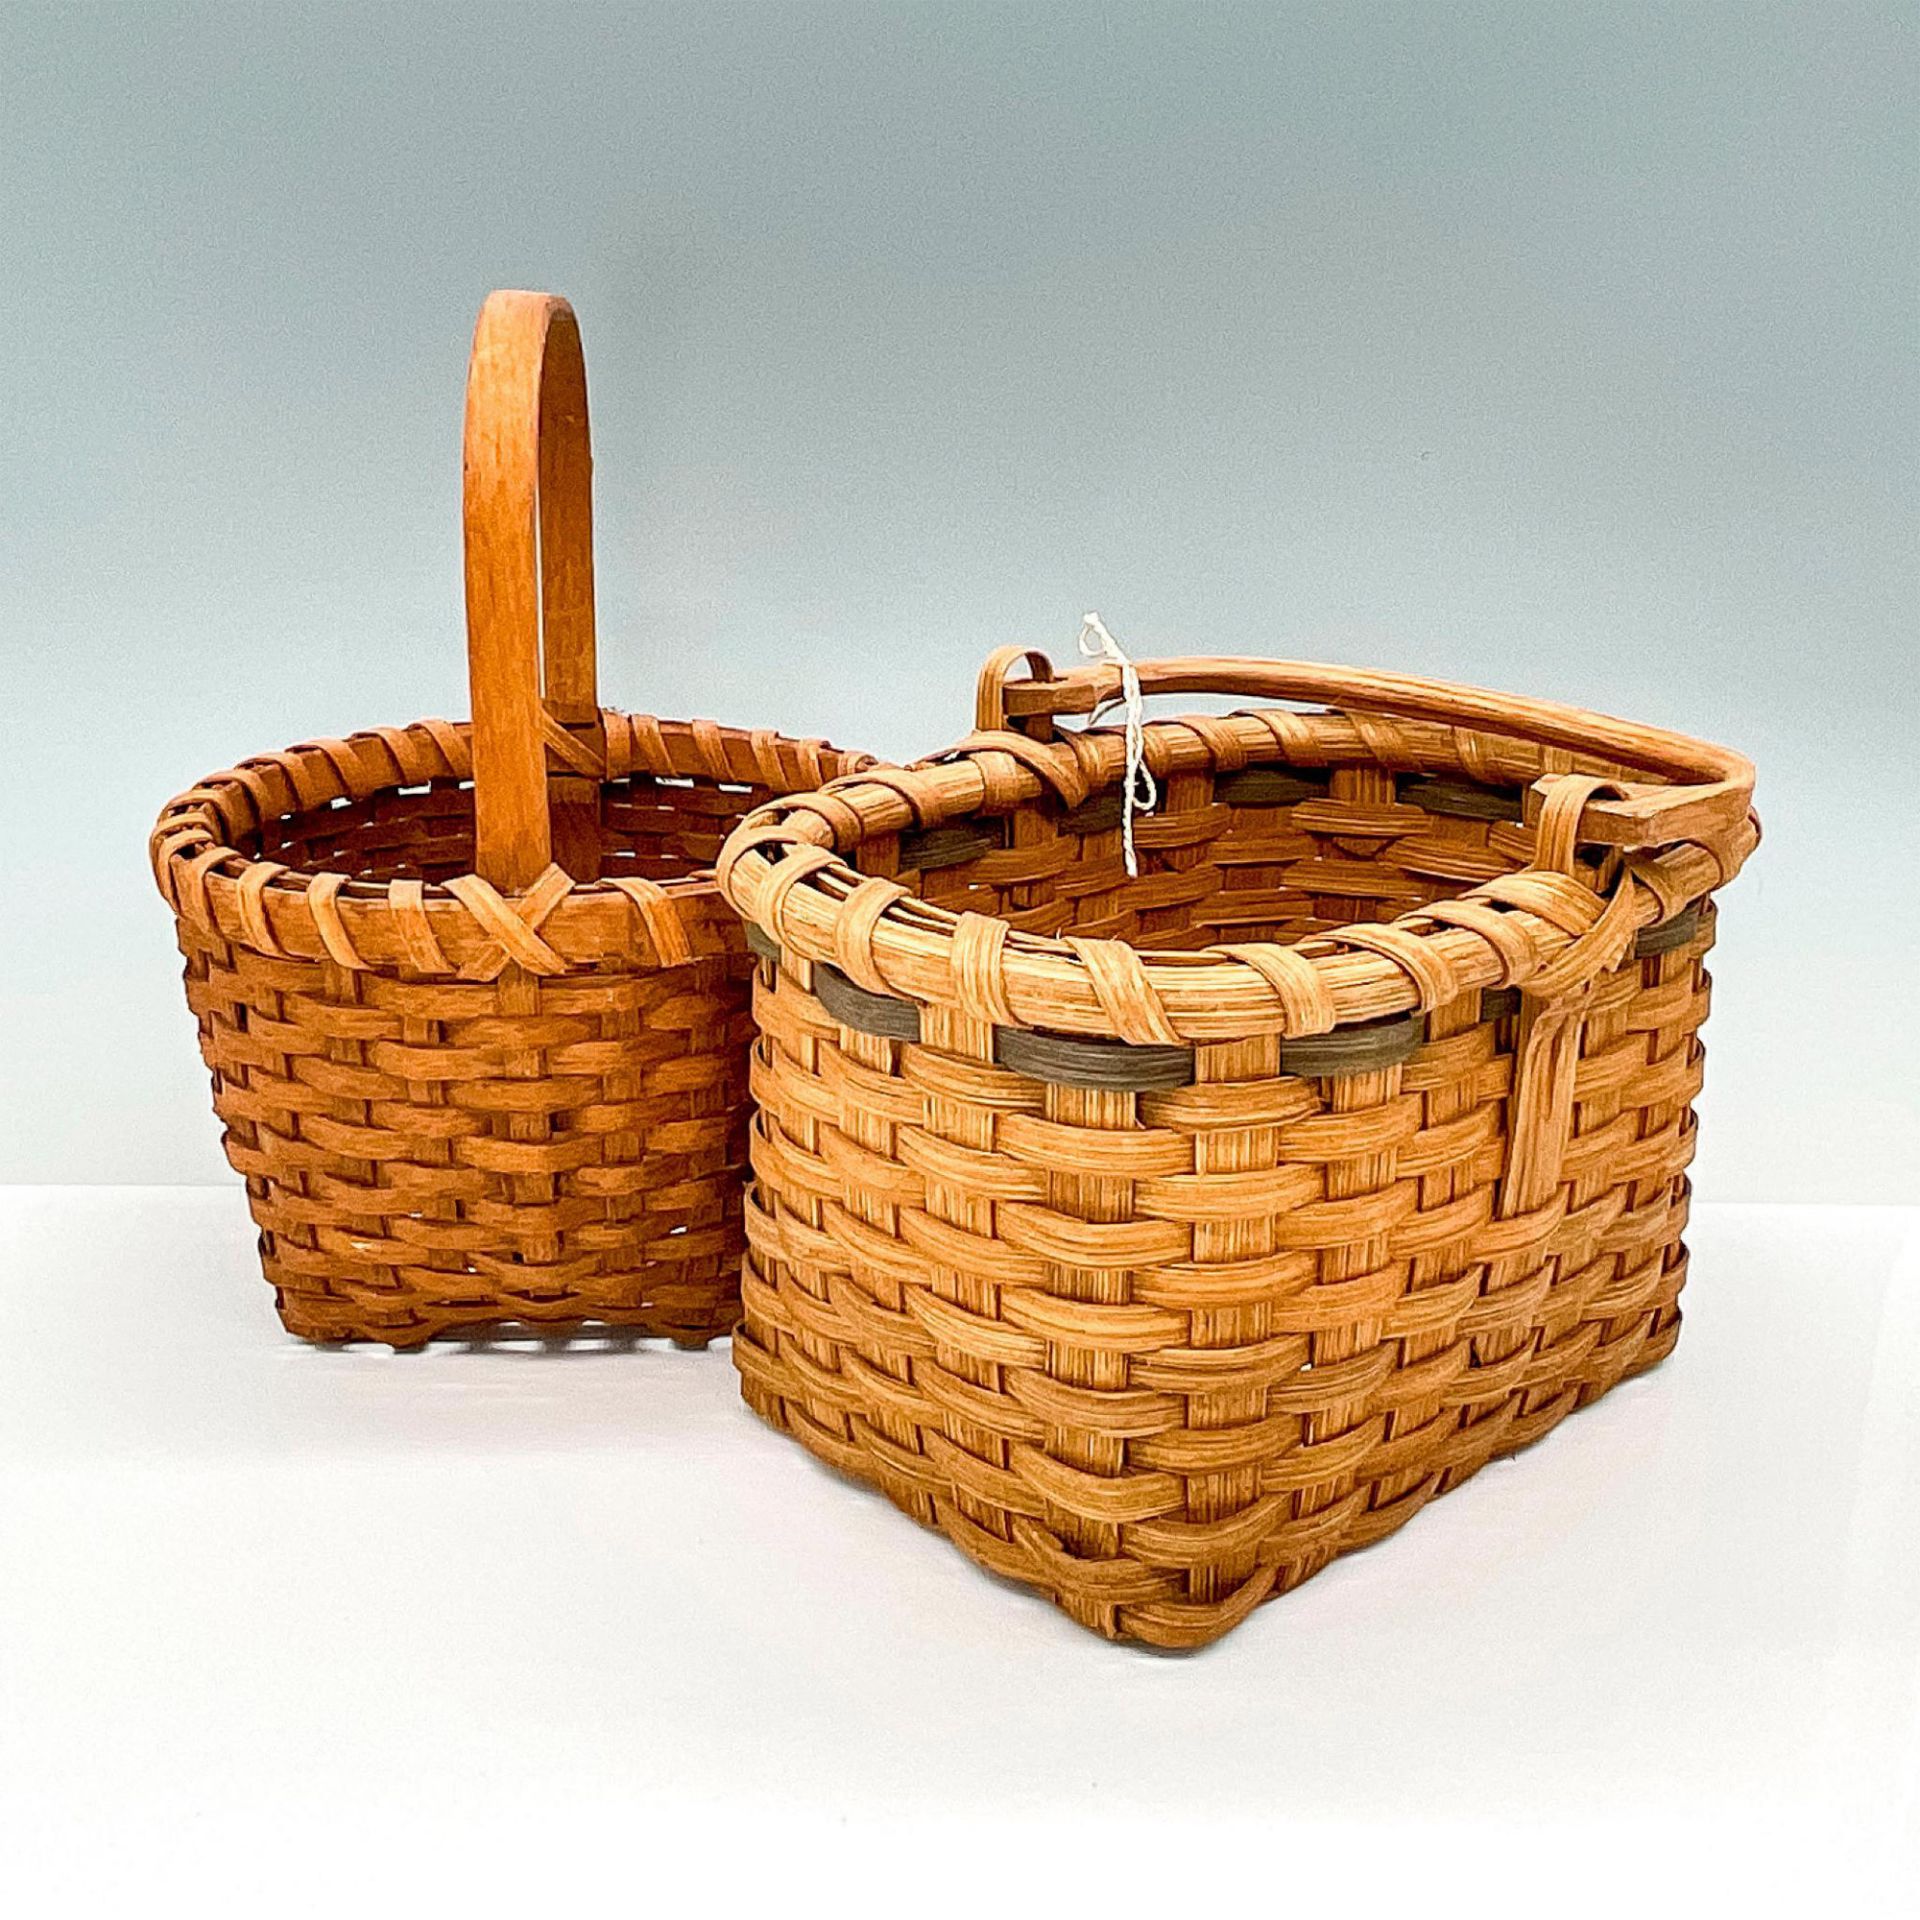 2pc Handwoven Wood and Rattan Baskets - Image 2 of 3